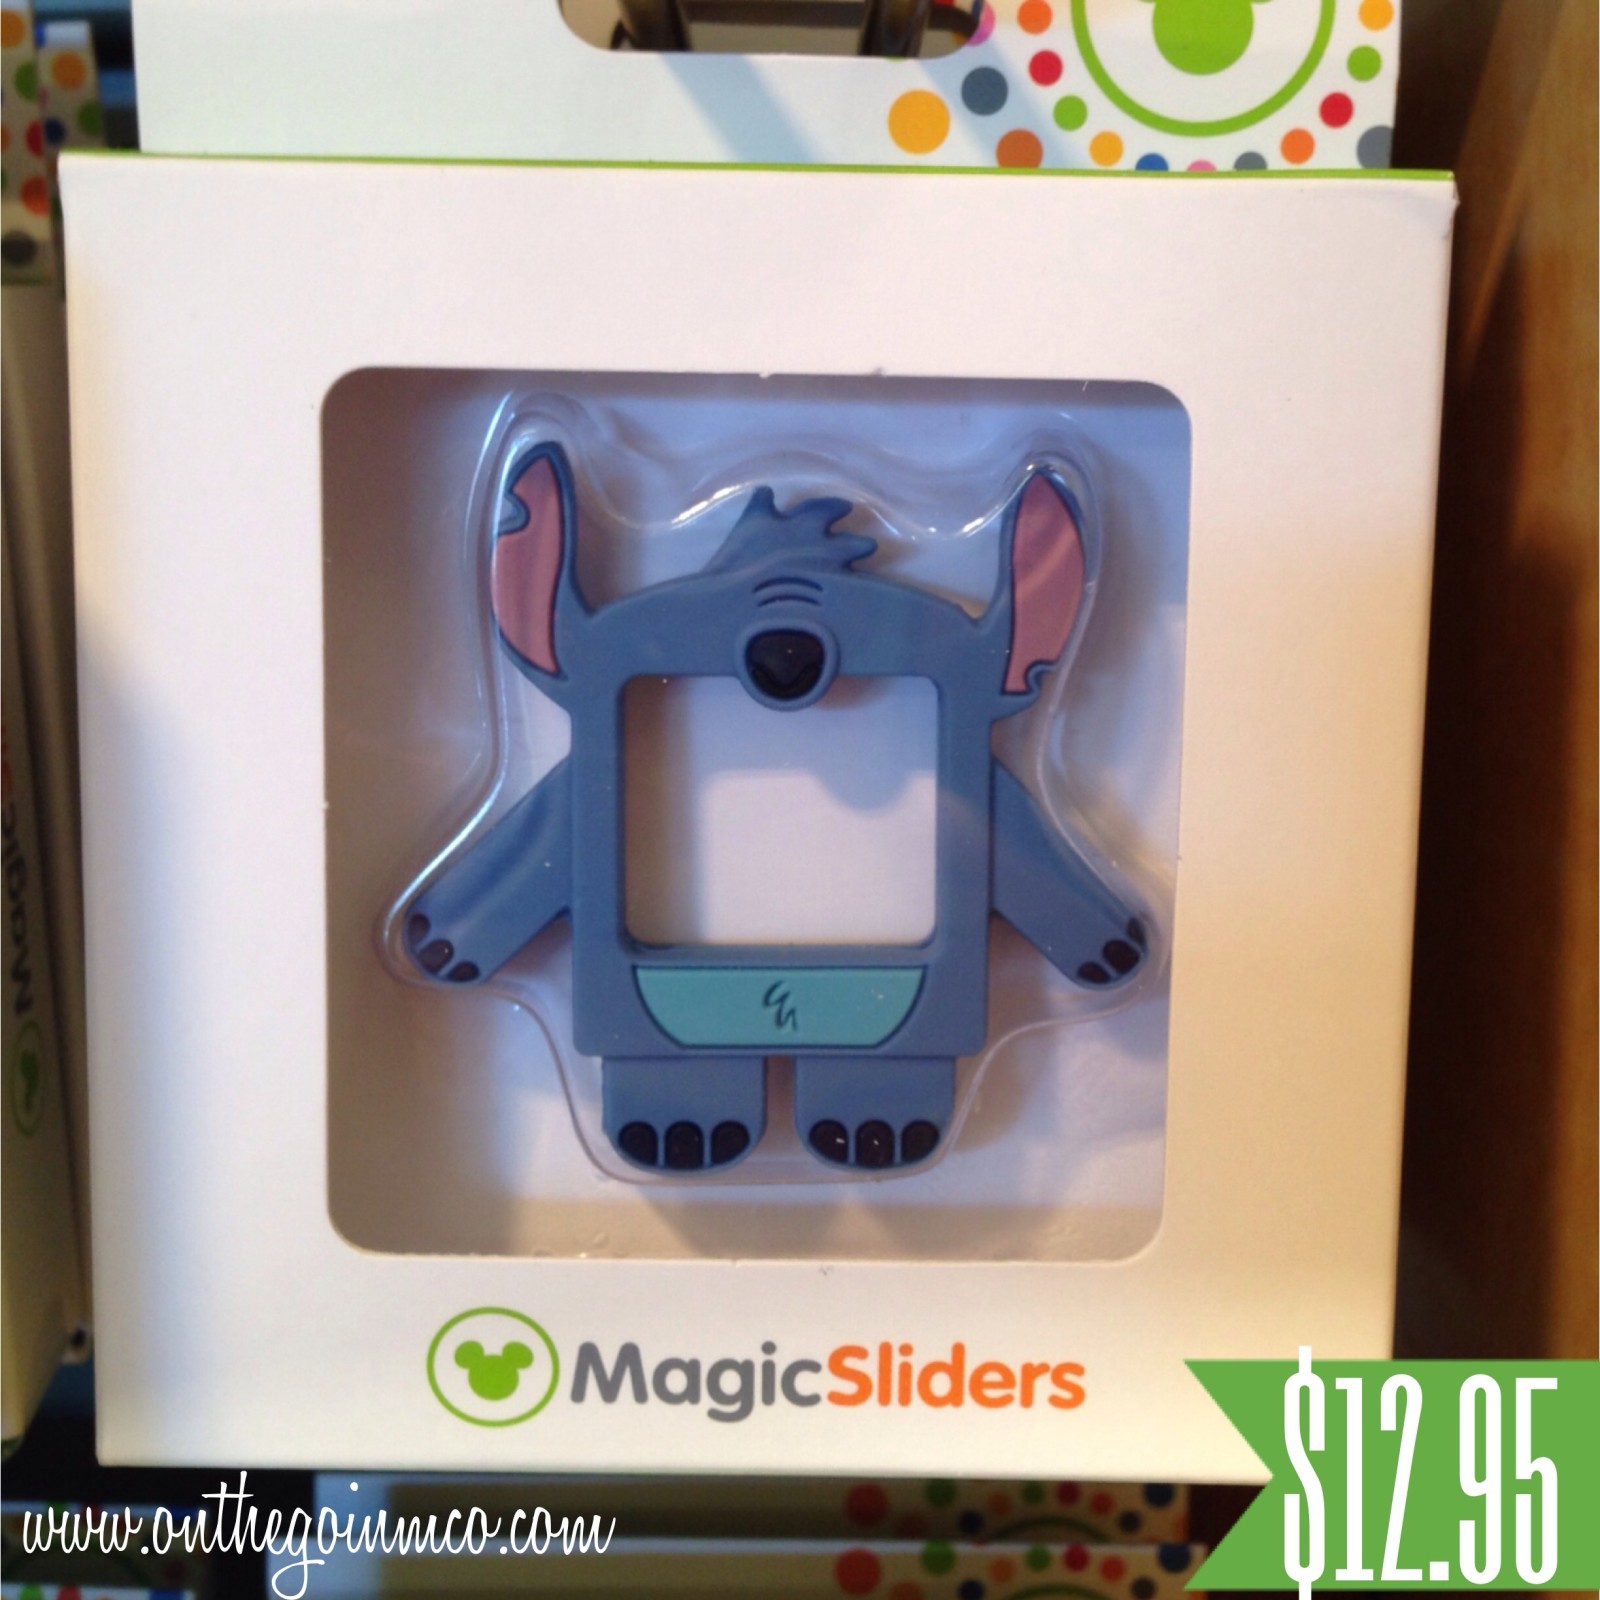 MagicBand Accessories 